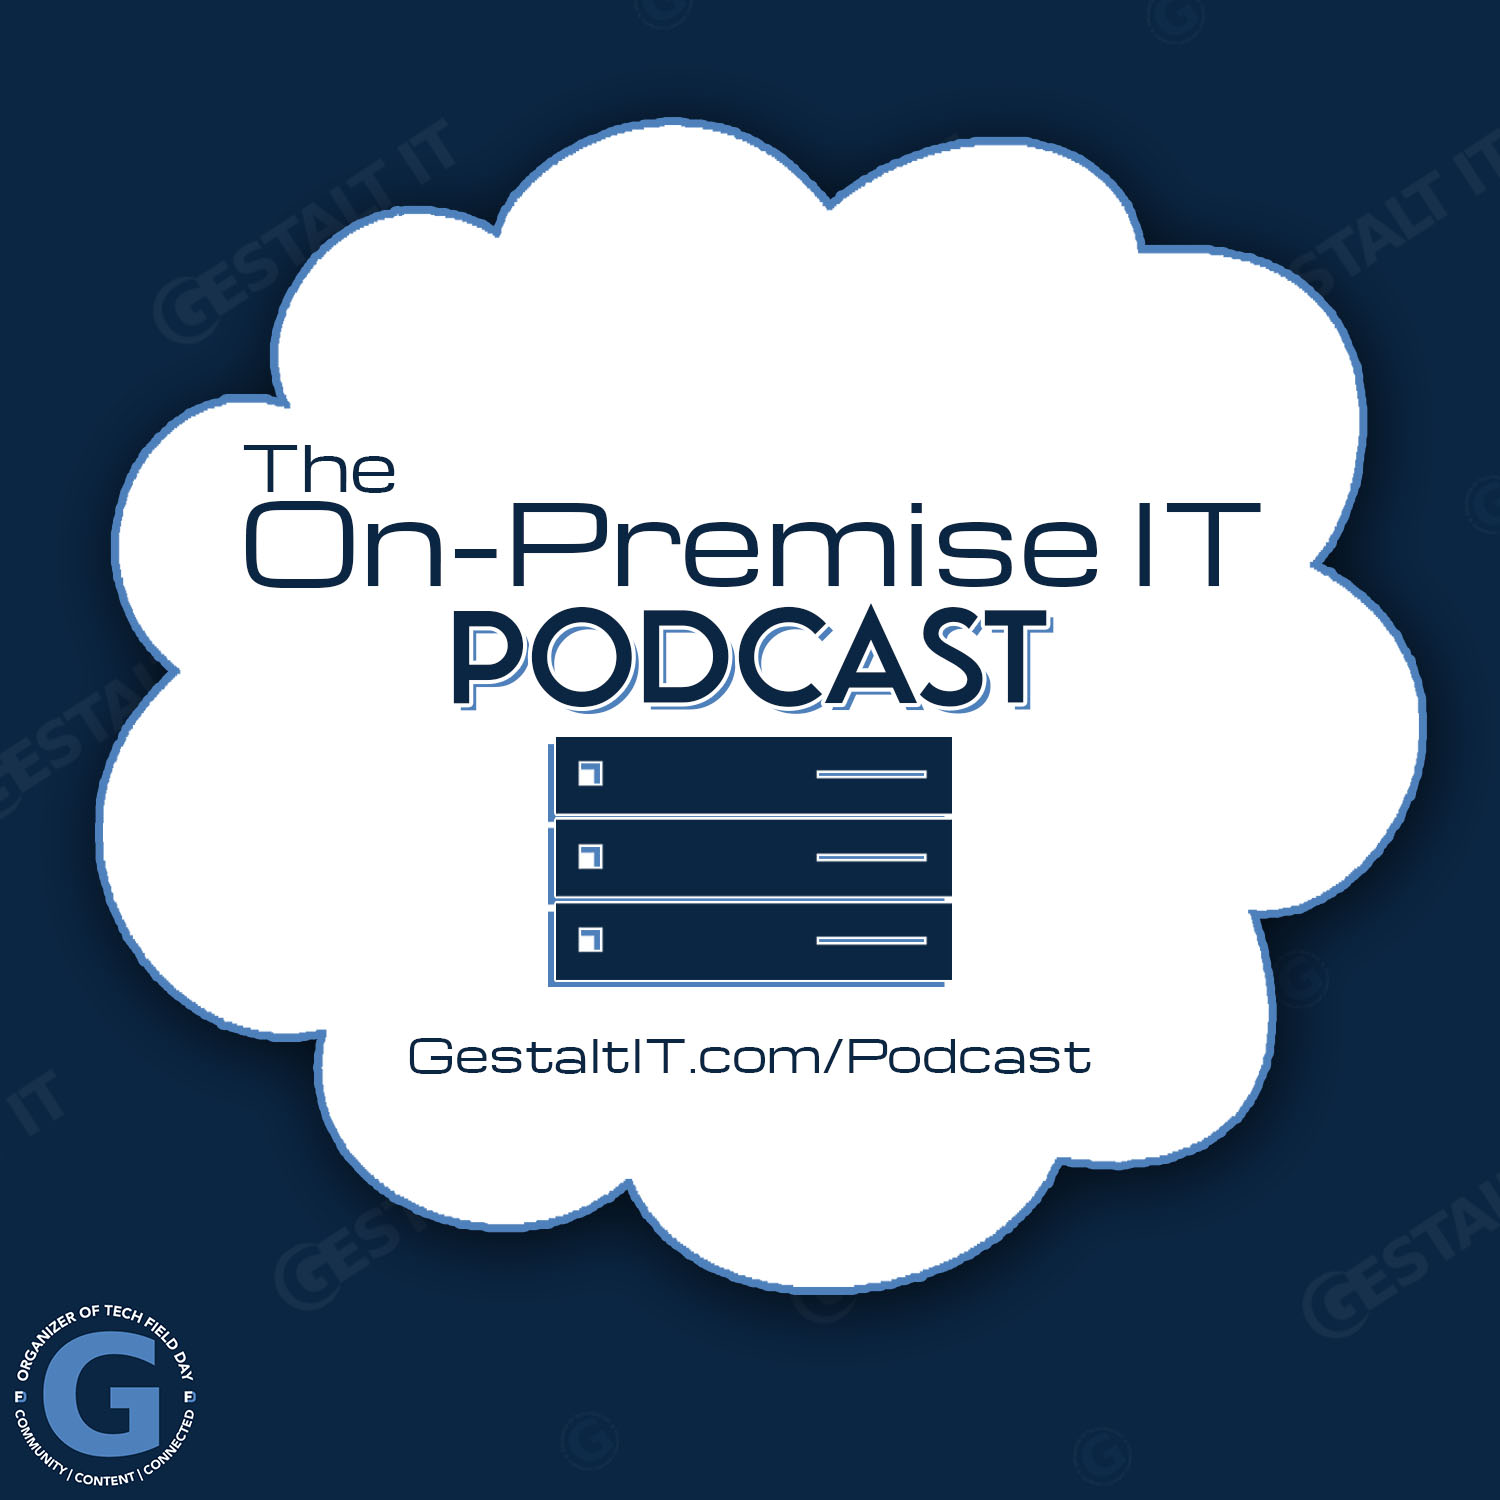 The On-Premise IT Roundtable